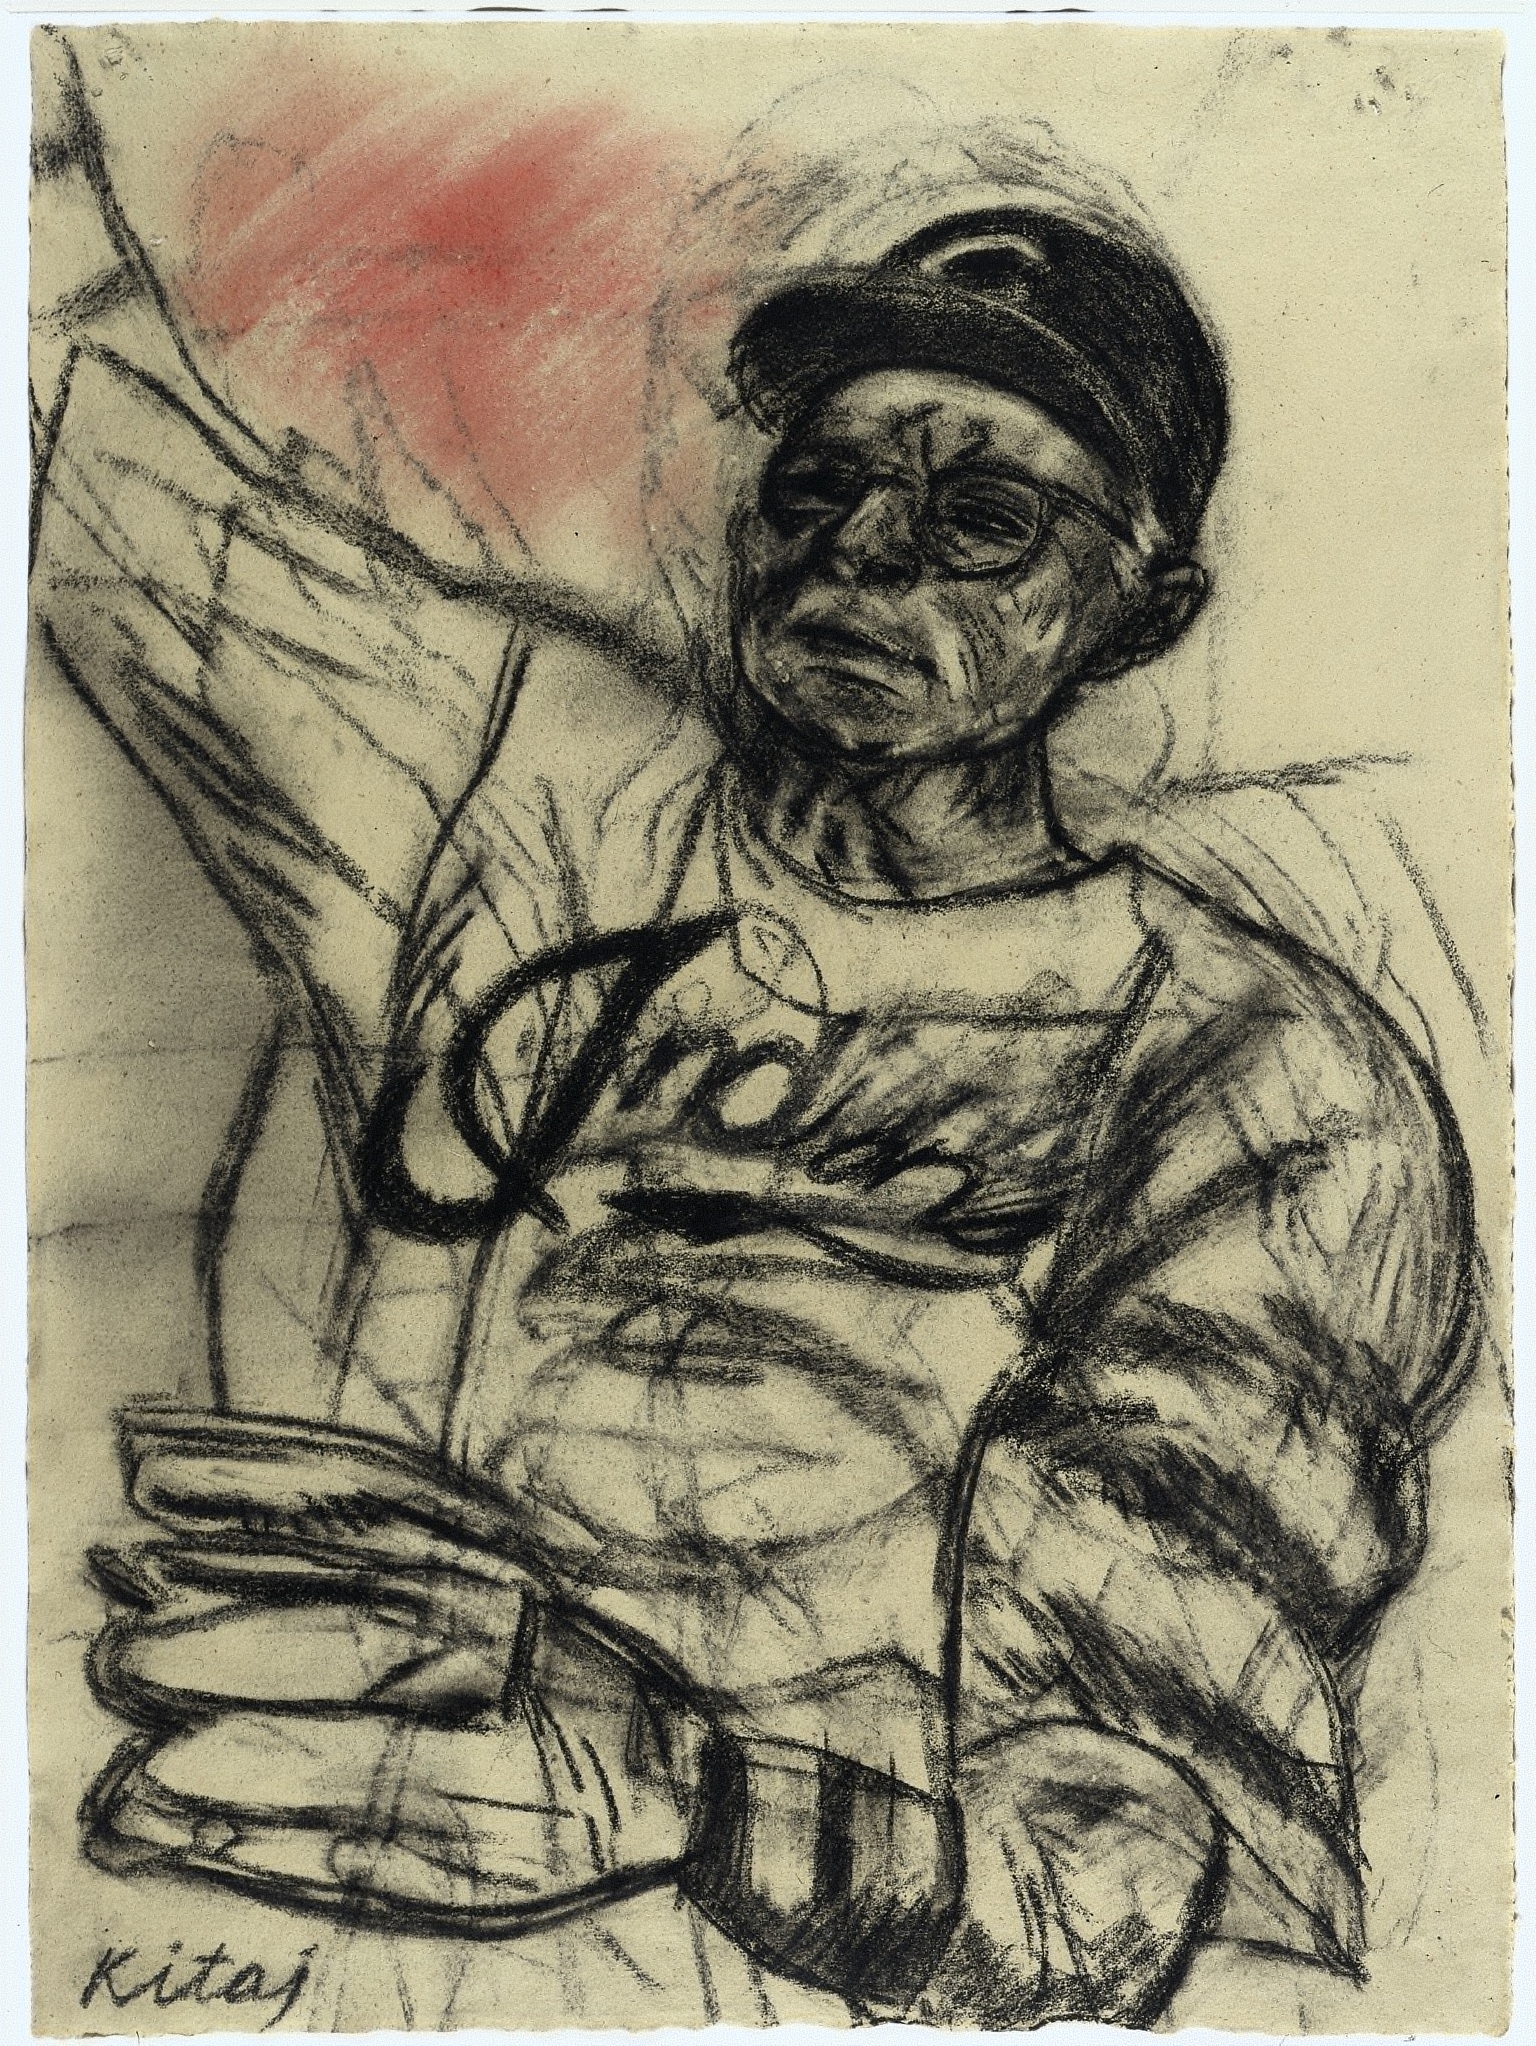 Self-Portrait as a Cleveland Indian